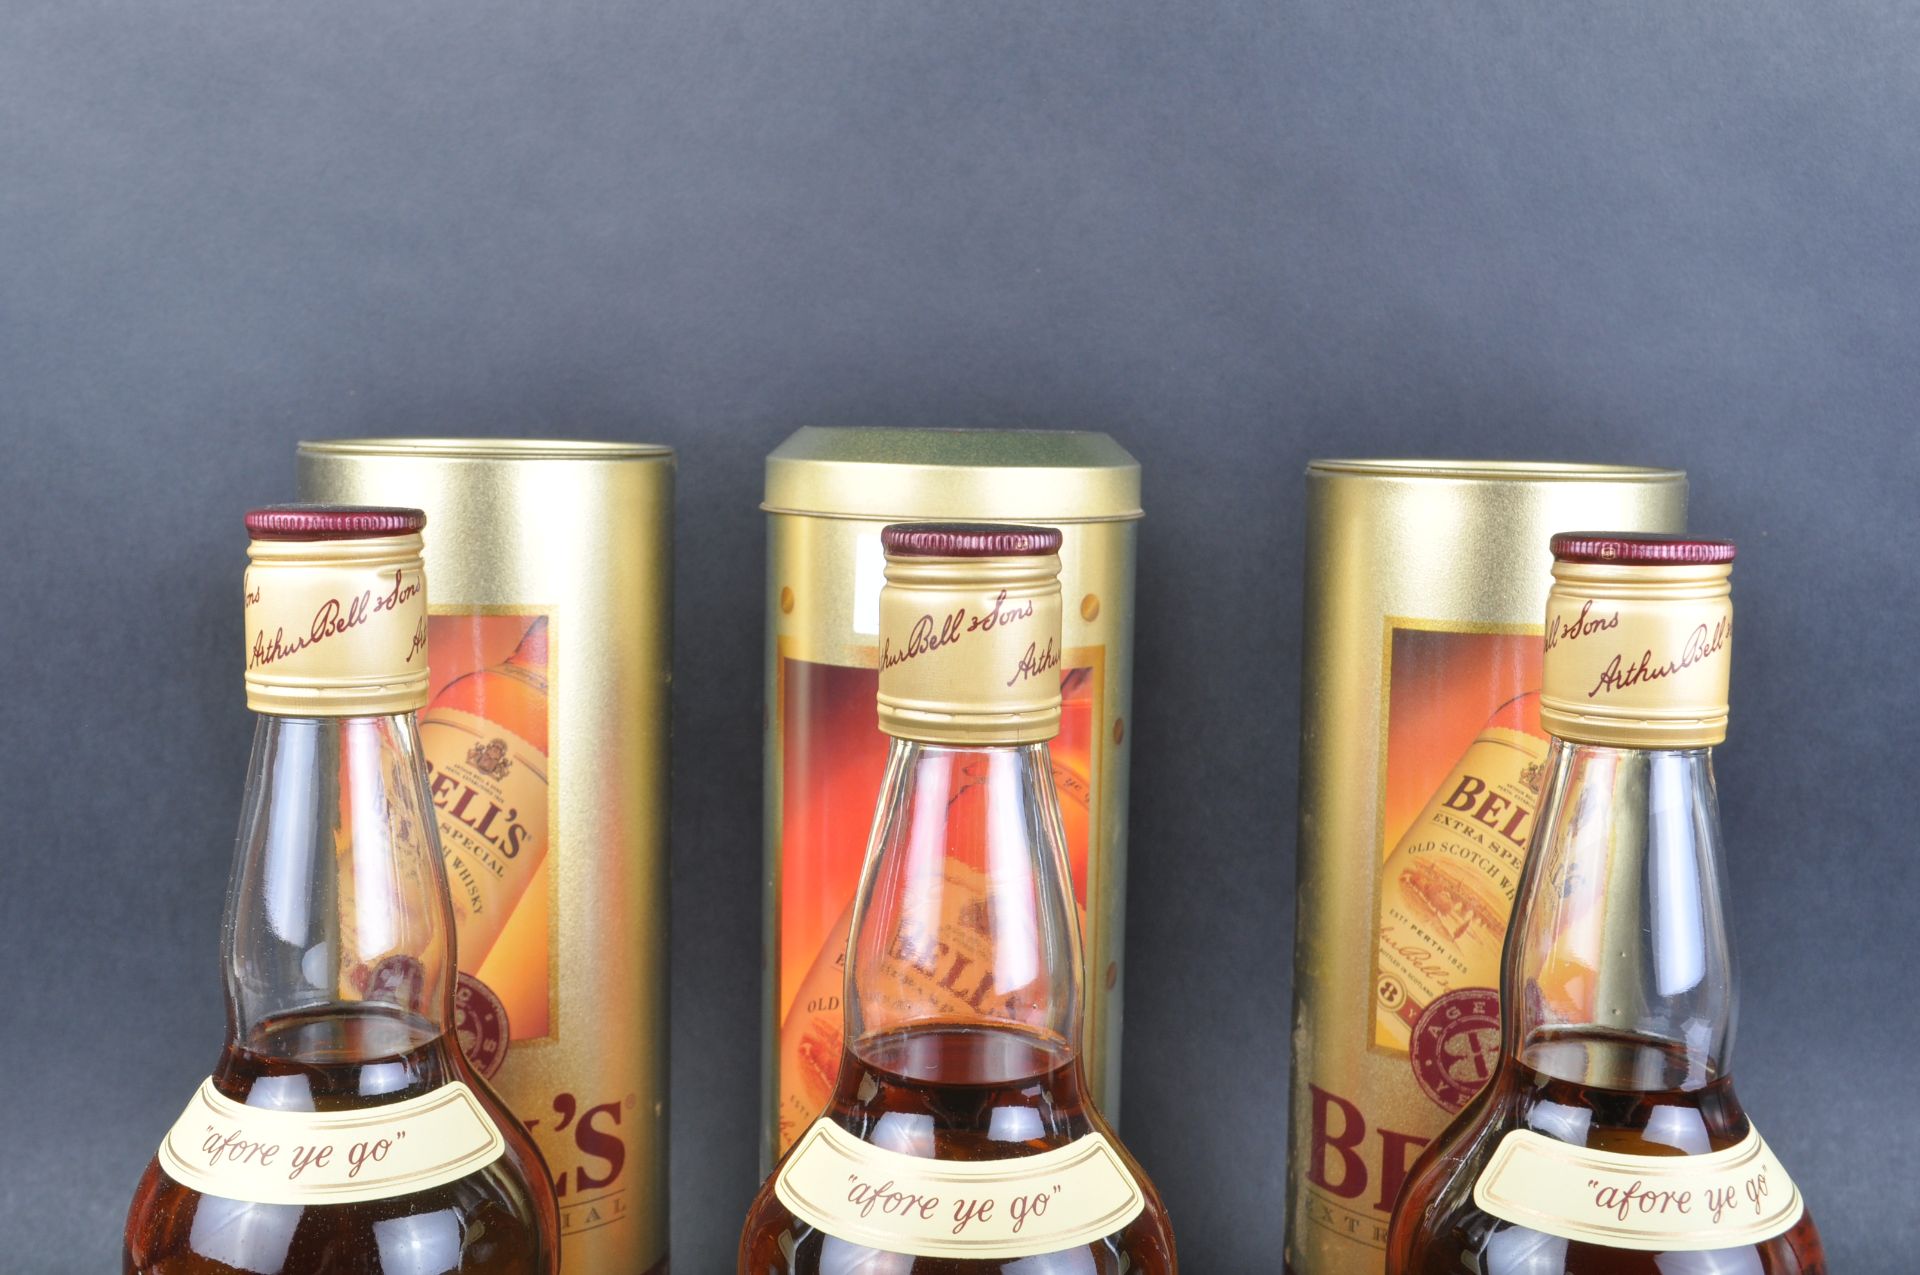 THREE BOTTLES OF BELLS EXTRA SPECIAL SCOTCH WHISKY - Image 3 of 4